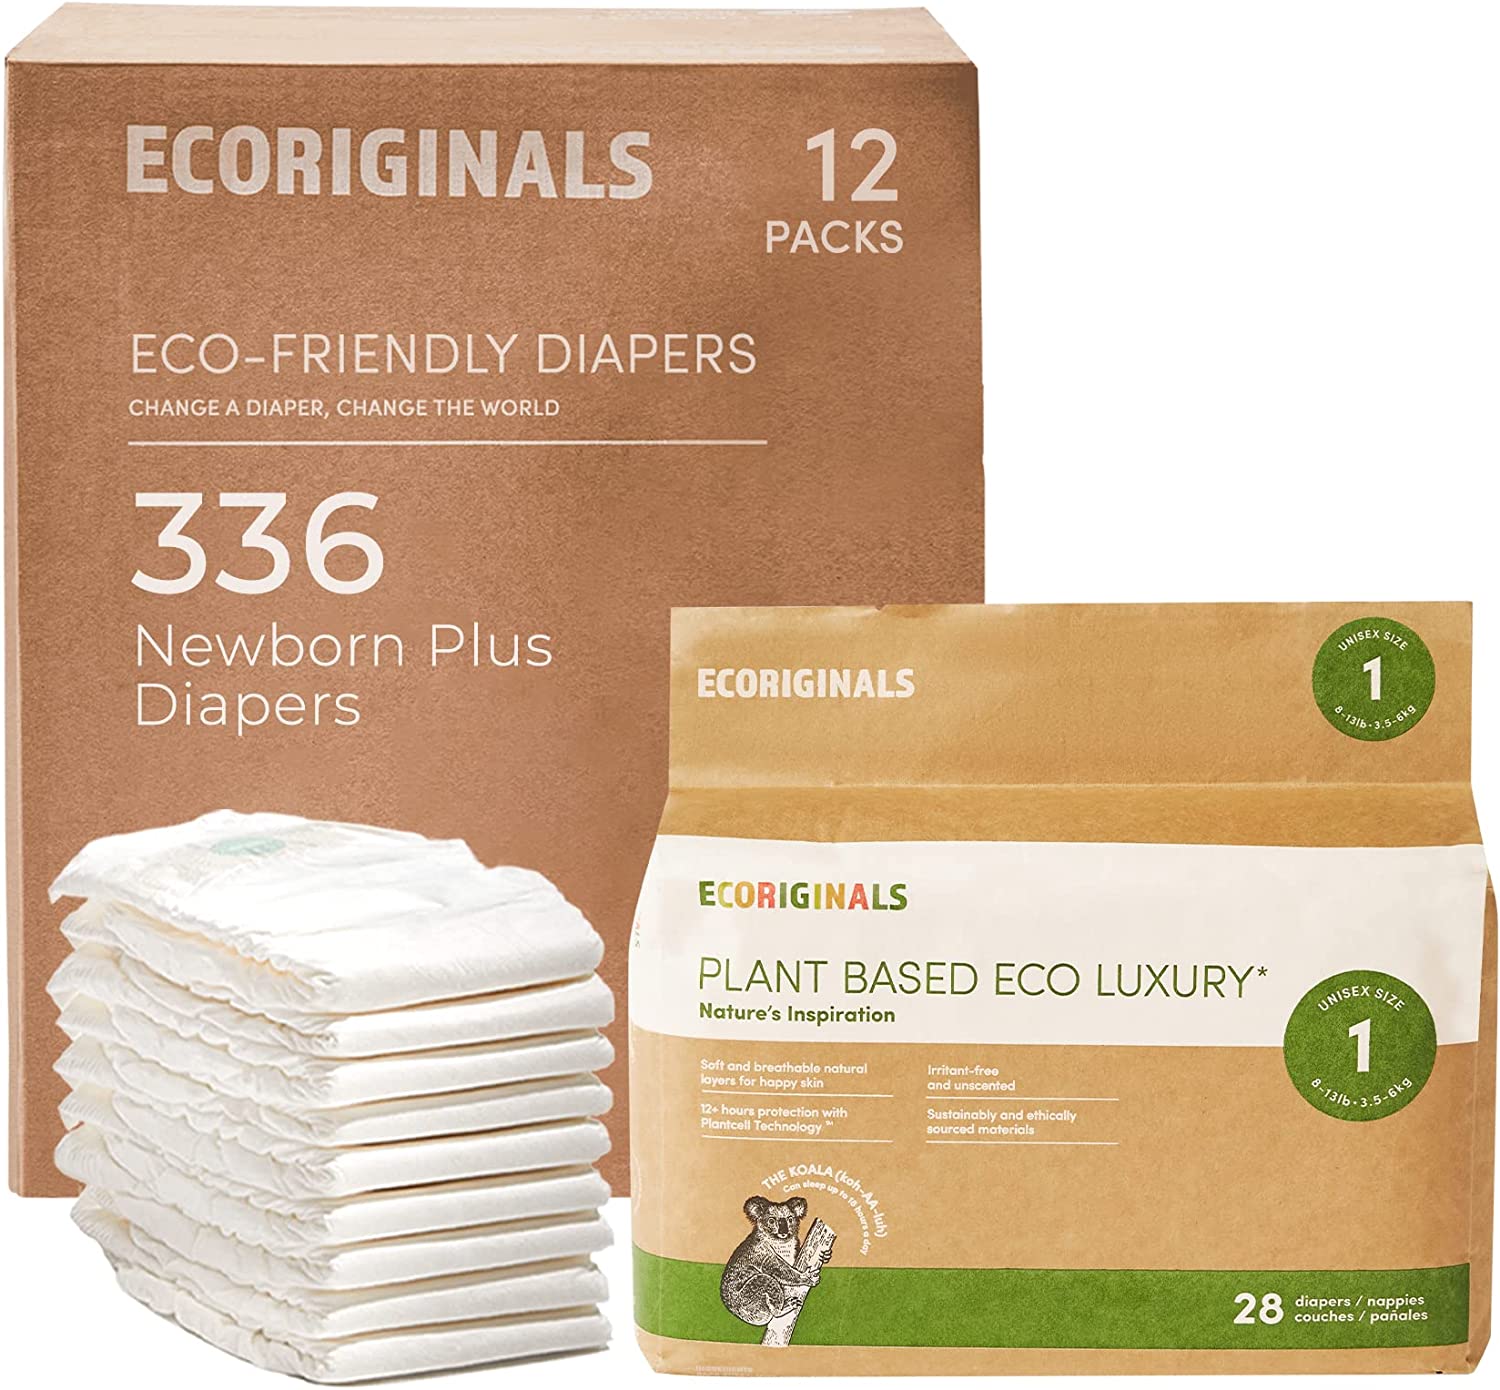 Ecoriginals Eco Disposable Diapers | Newborn Plus Baby Size 1, 5-11lbs | 12 Pack, 336 Count | Plant-Based, Non-Toxic